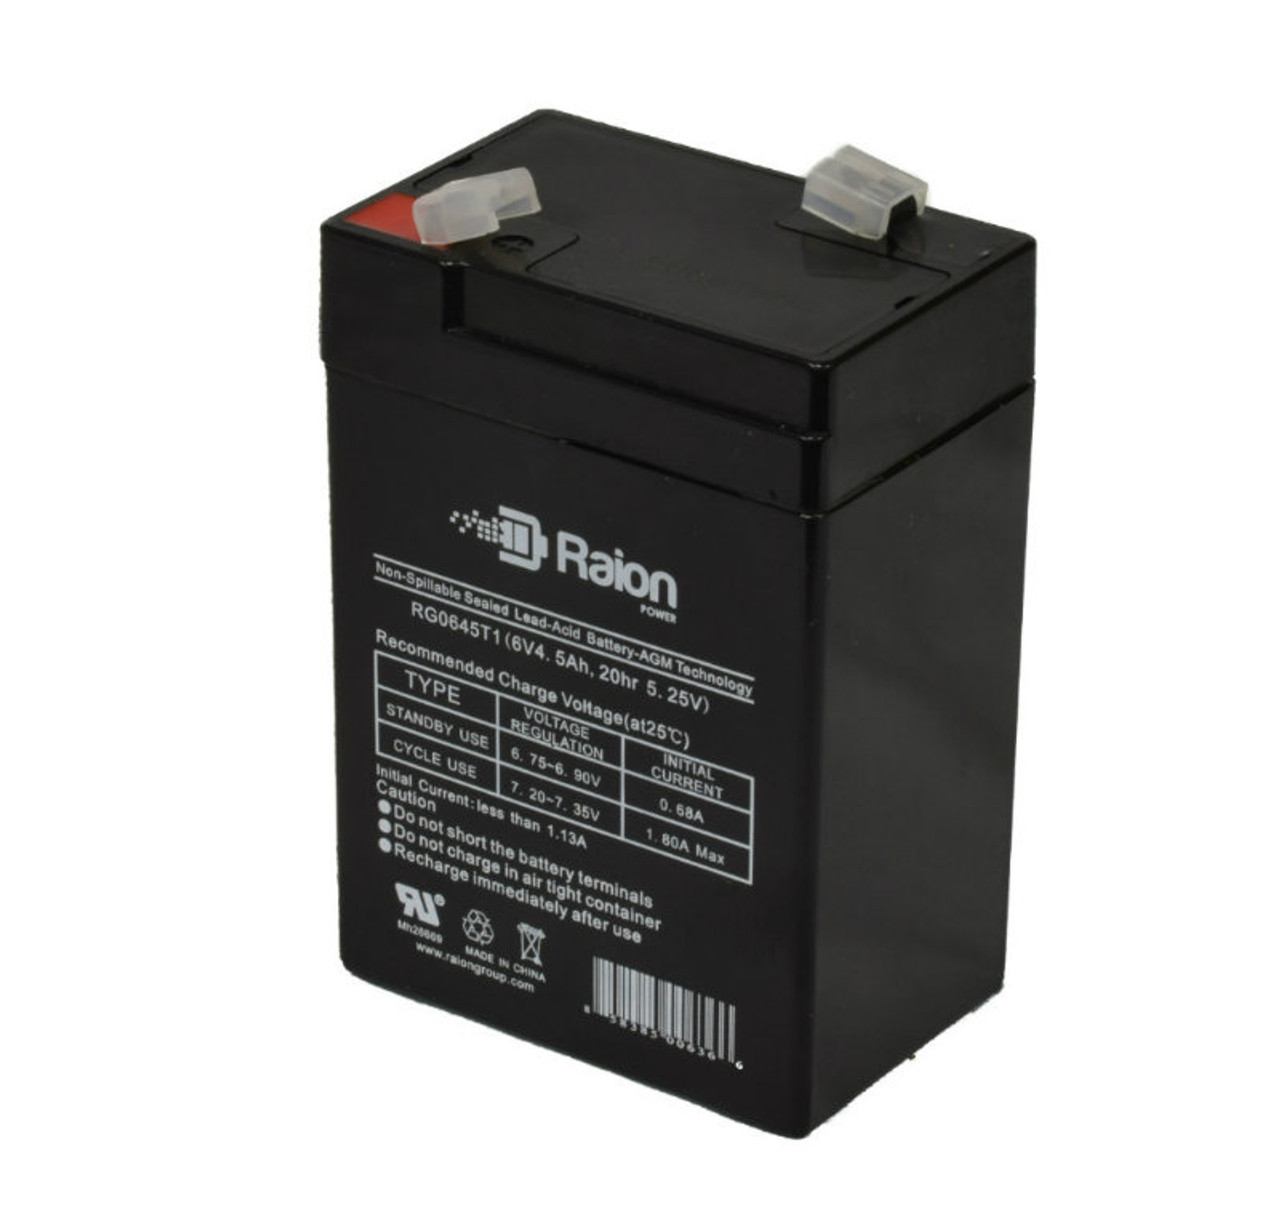 Raion Power RG0645T1 6V 4.5Ah Replacement Battery Cartridge for MUST FC6-4CUT